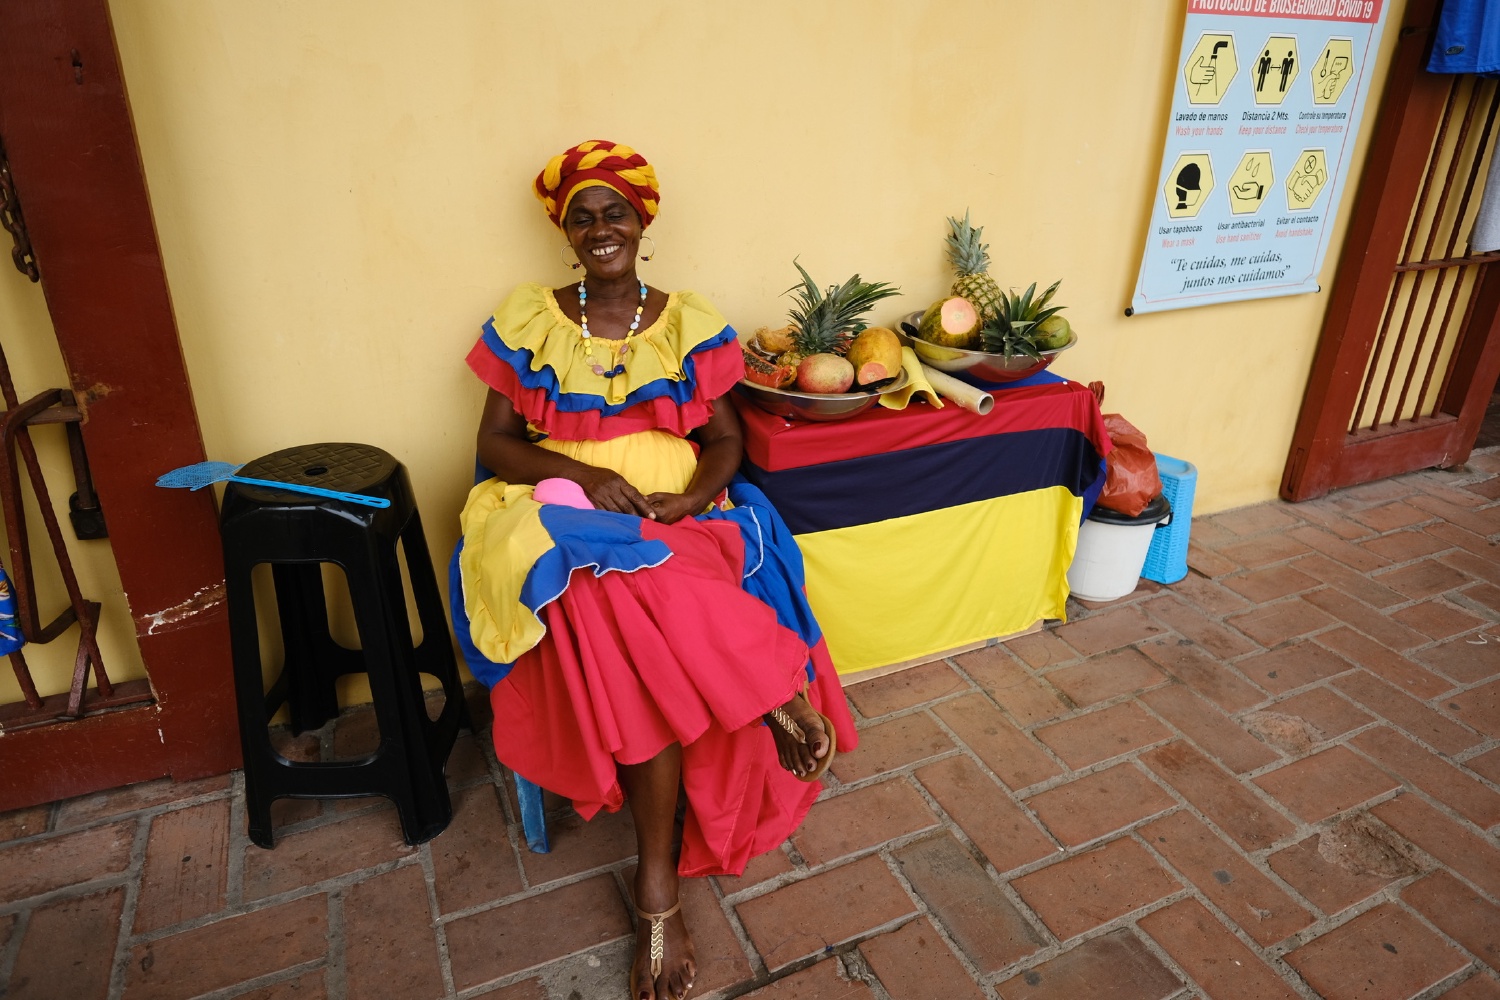 Palenqueras are a symbol of Cartagena's Afro-Colombian community, and are known for their colorful outfit and fruits and veggies!